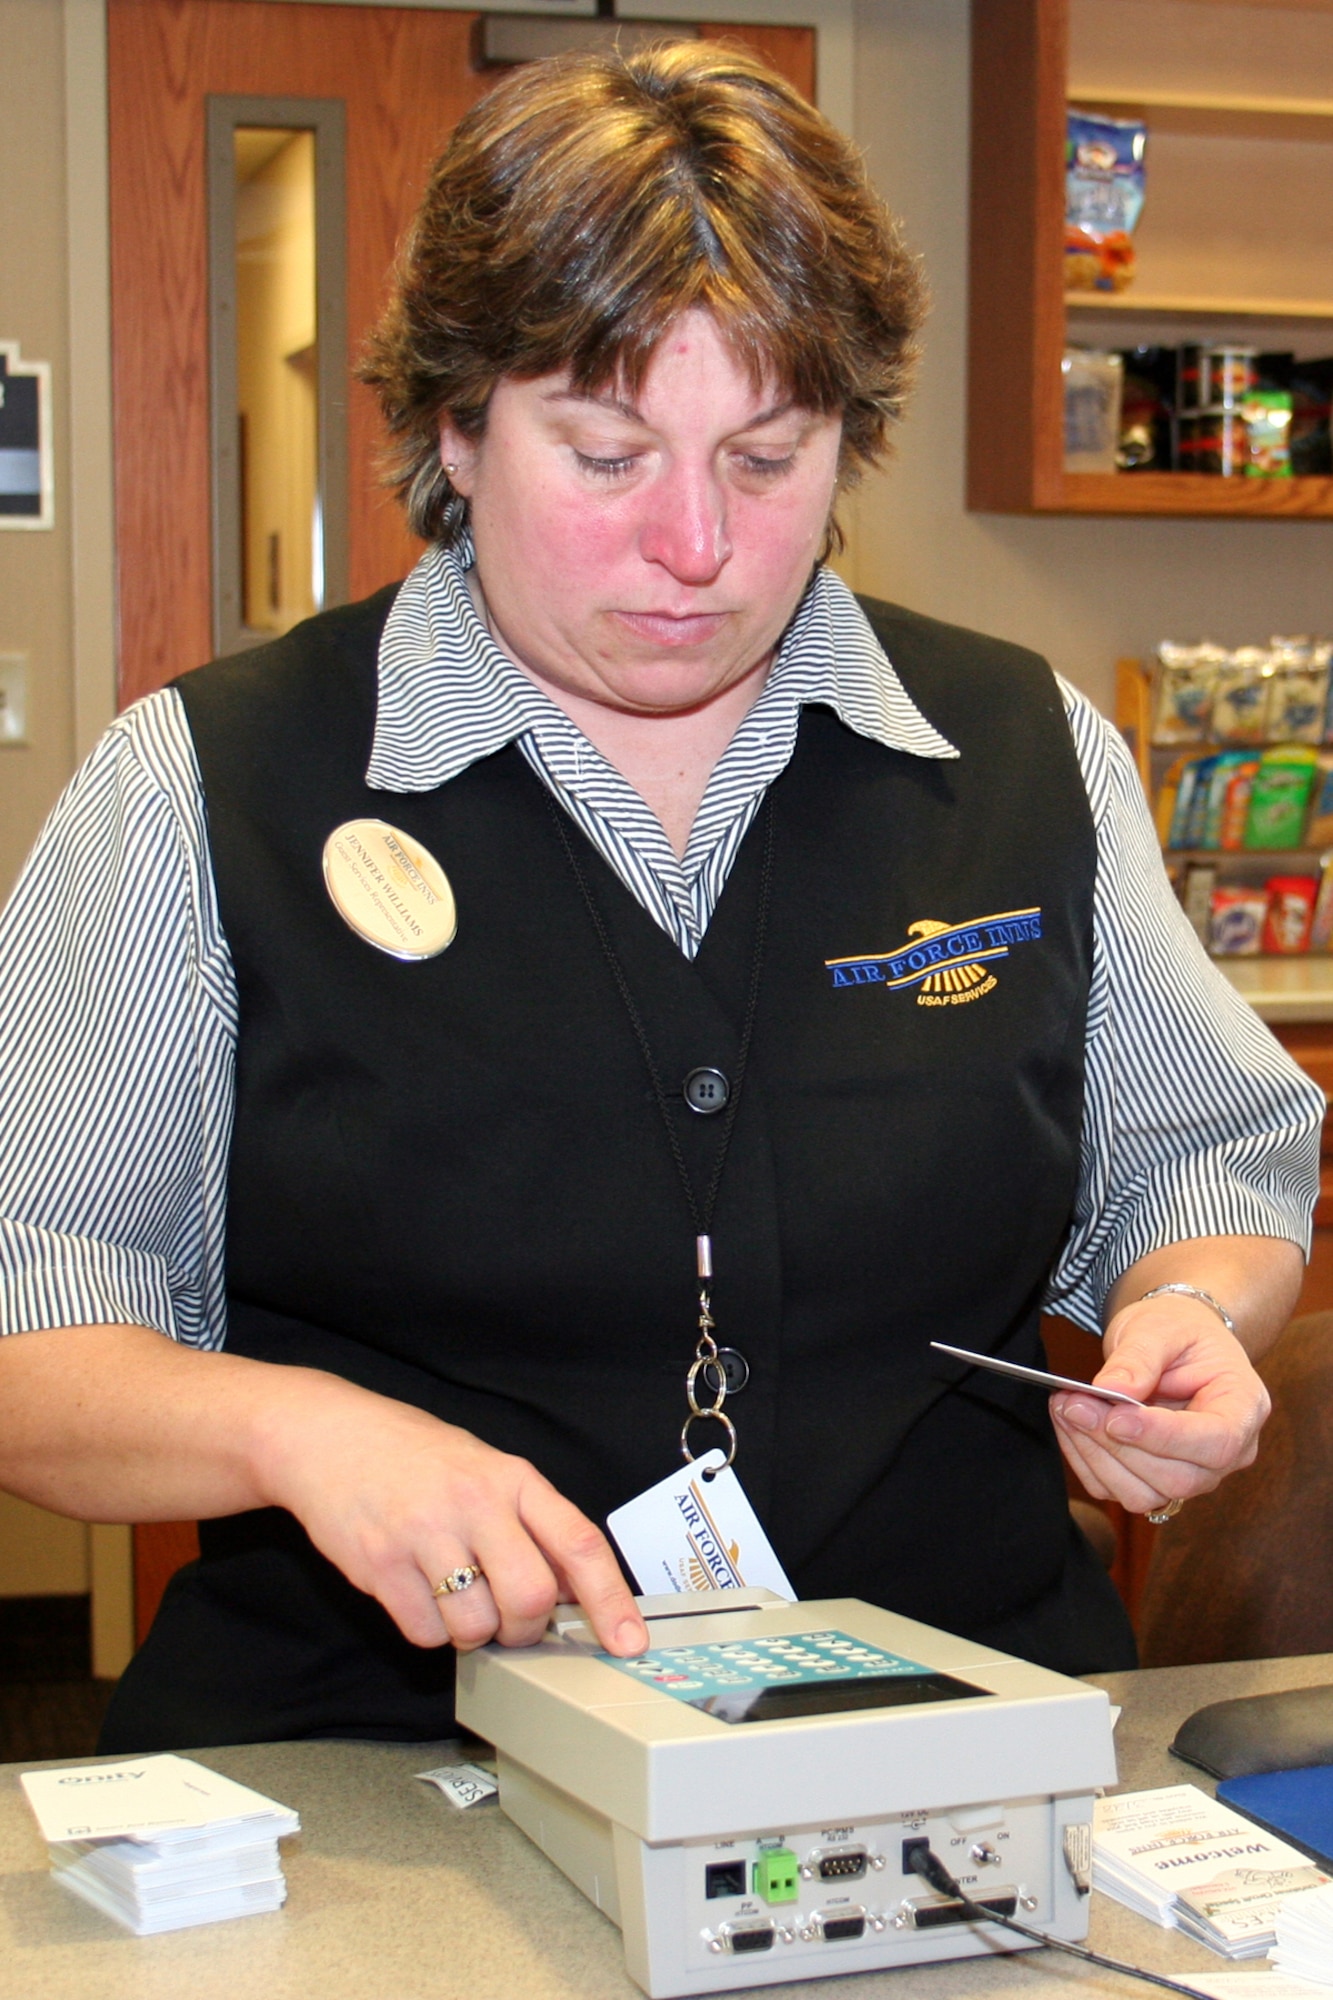 GRISSOM AIR RESERVE BASE, Ind., -- Grissom lodging guest services representative Jennifer Williams prepares room key cards for a unit training assembly weekend.  The Grissom guest services staff work diligently to ensure 434th Air Refueling Wing members have comfortable lodging when they report for duty at Grissom. (U.S. Air Force photo/Staff Sgt. Chris Bolen)